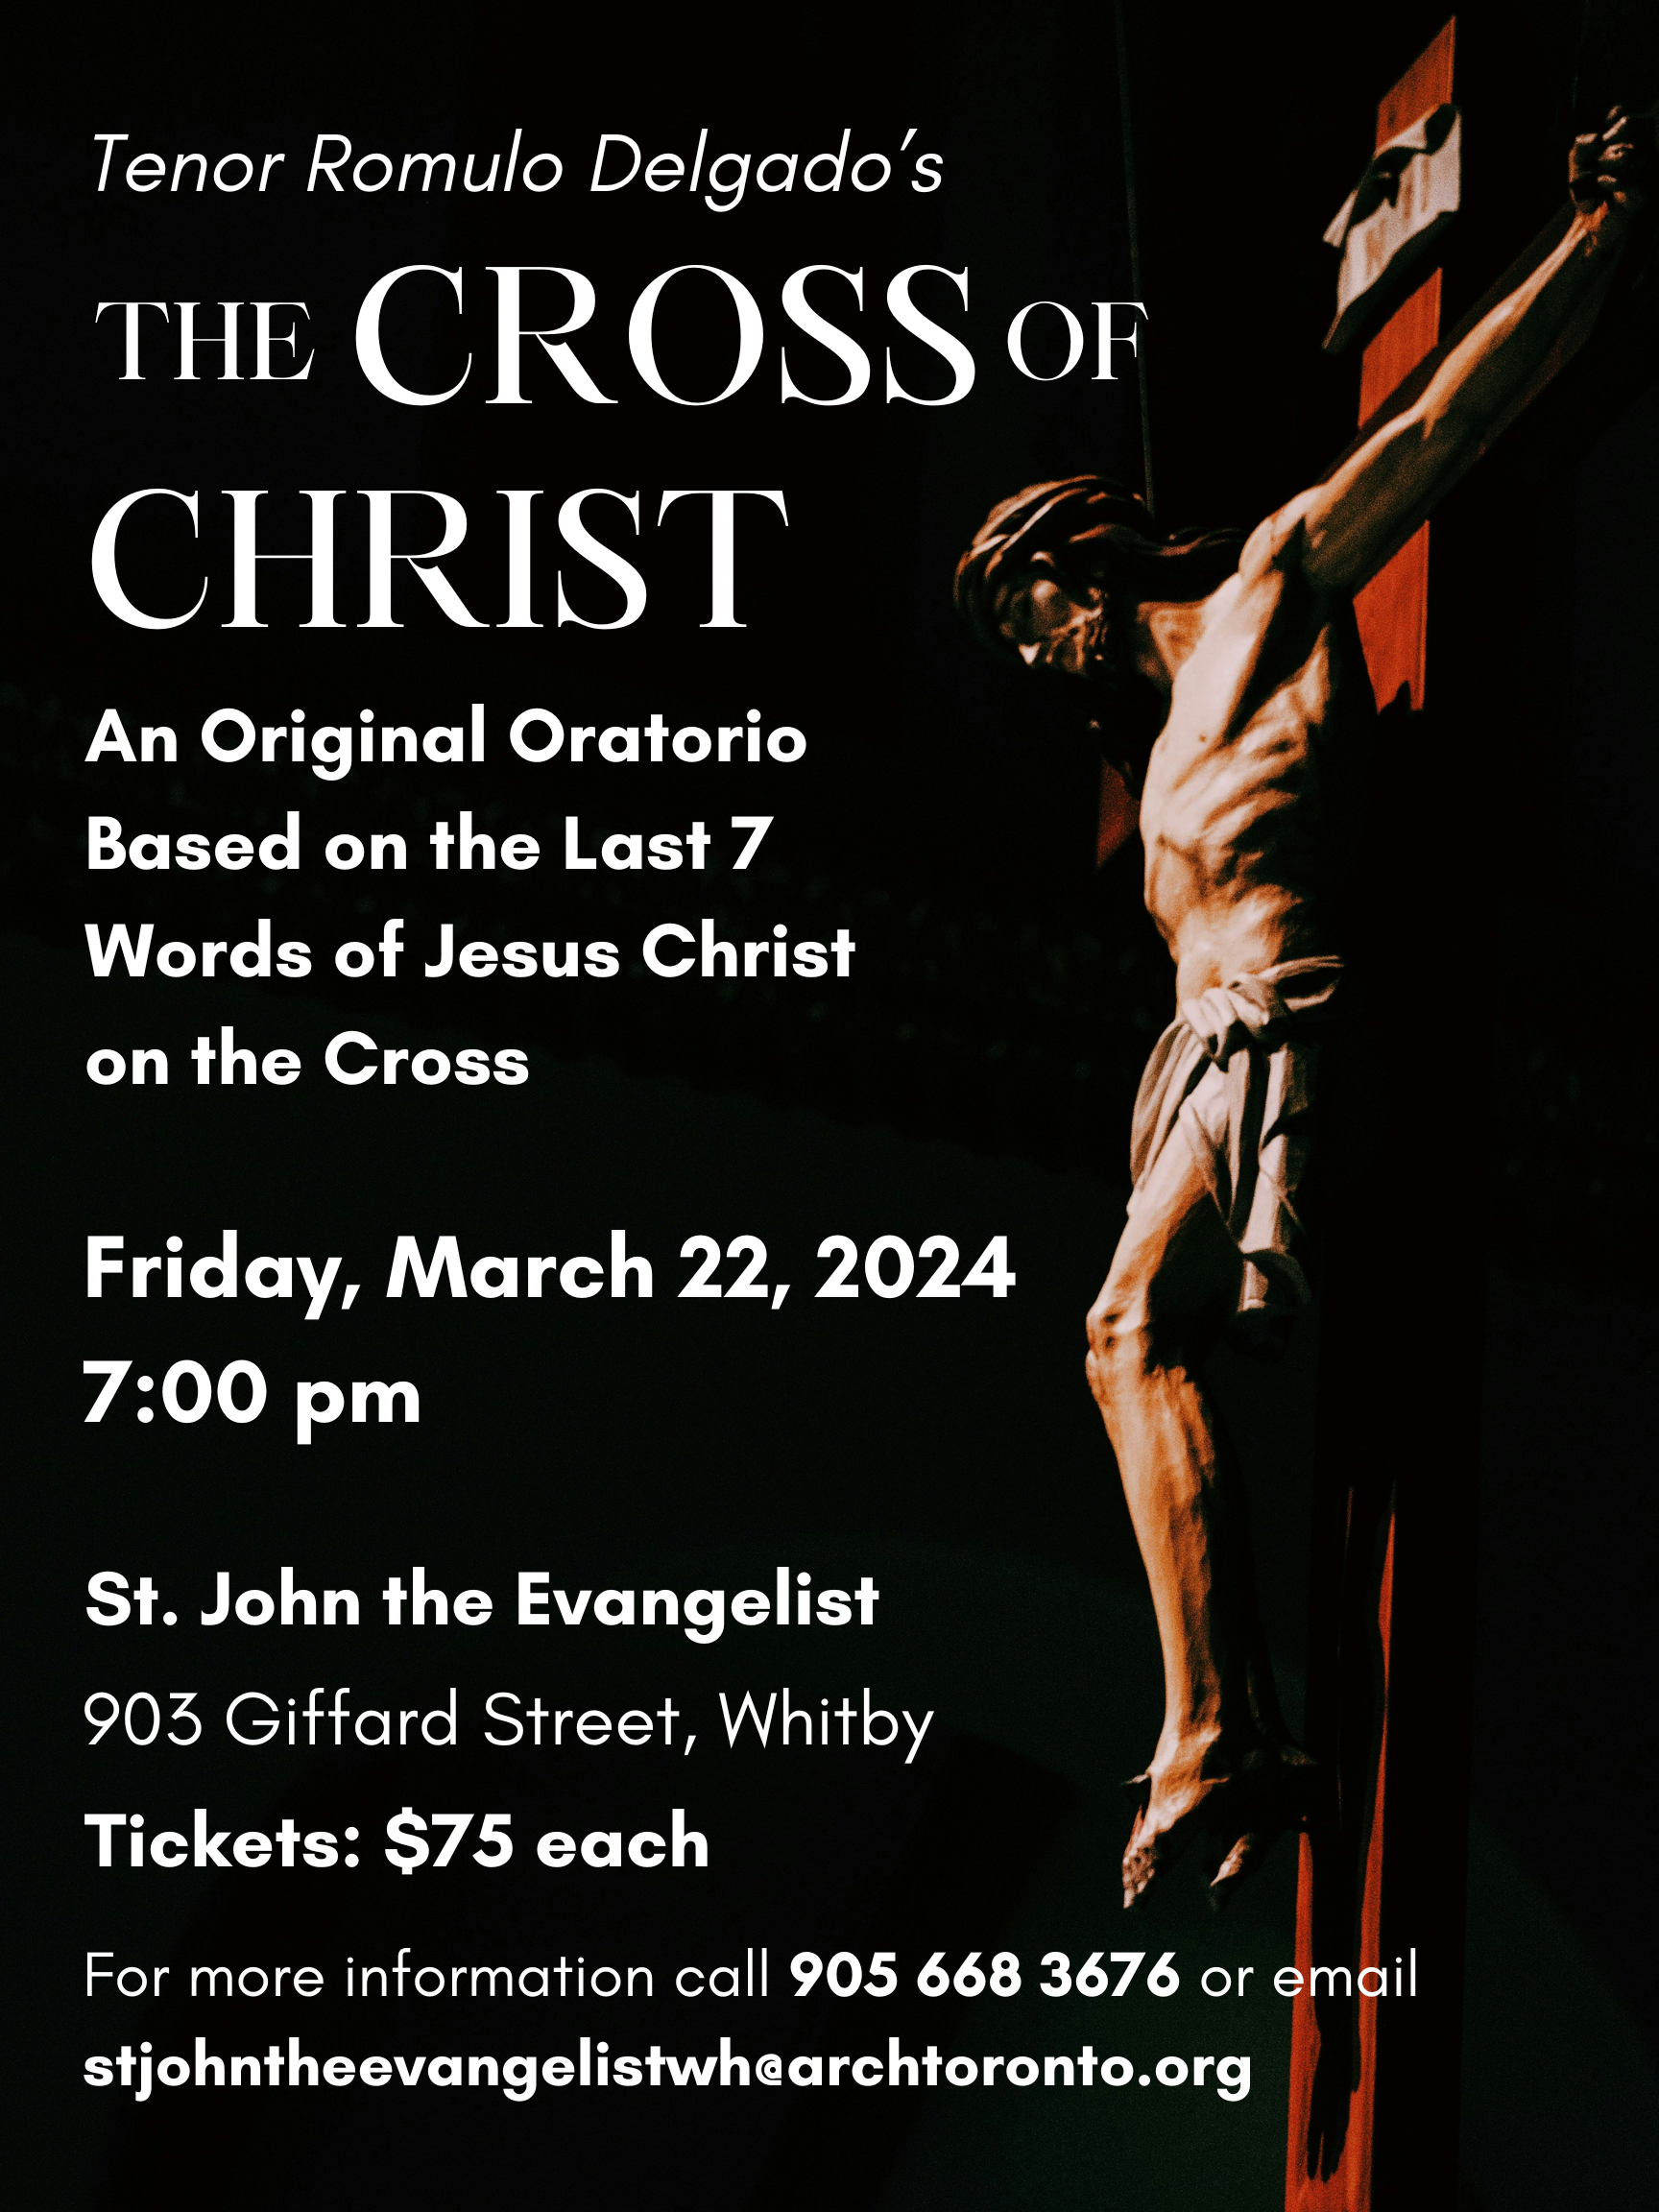 A photo of a crucifix in the Dark advertising the Cross of Christ Oratorio on Friday, March 22nd, 2024 at St. John the Evangelist Church